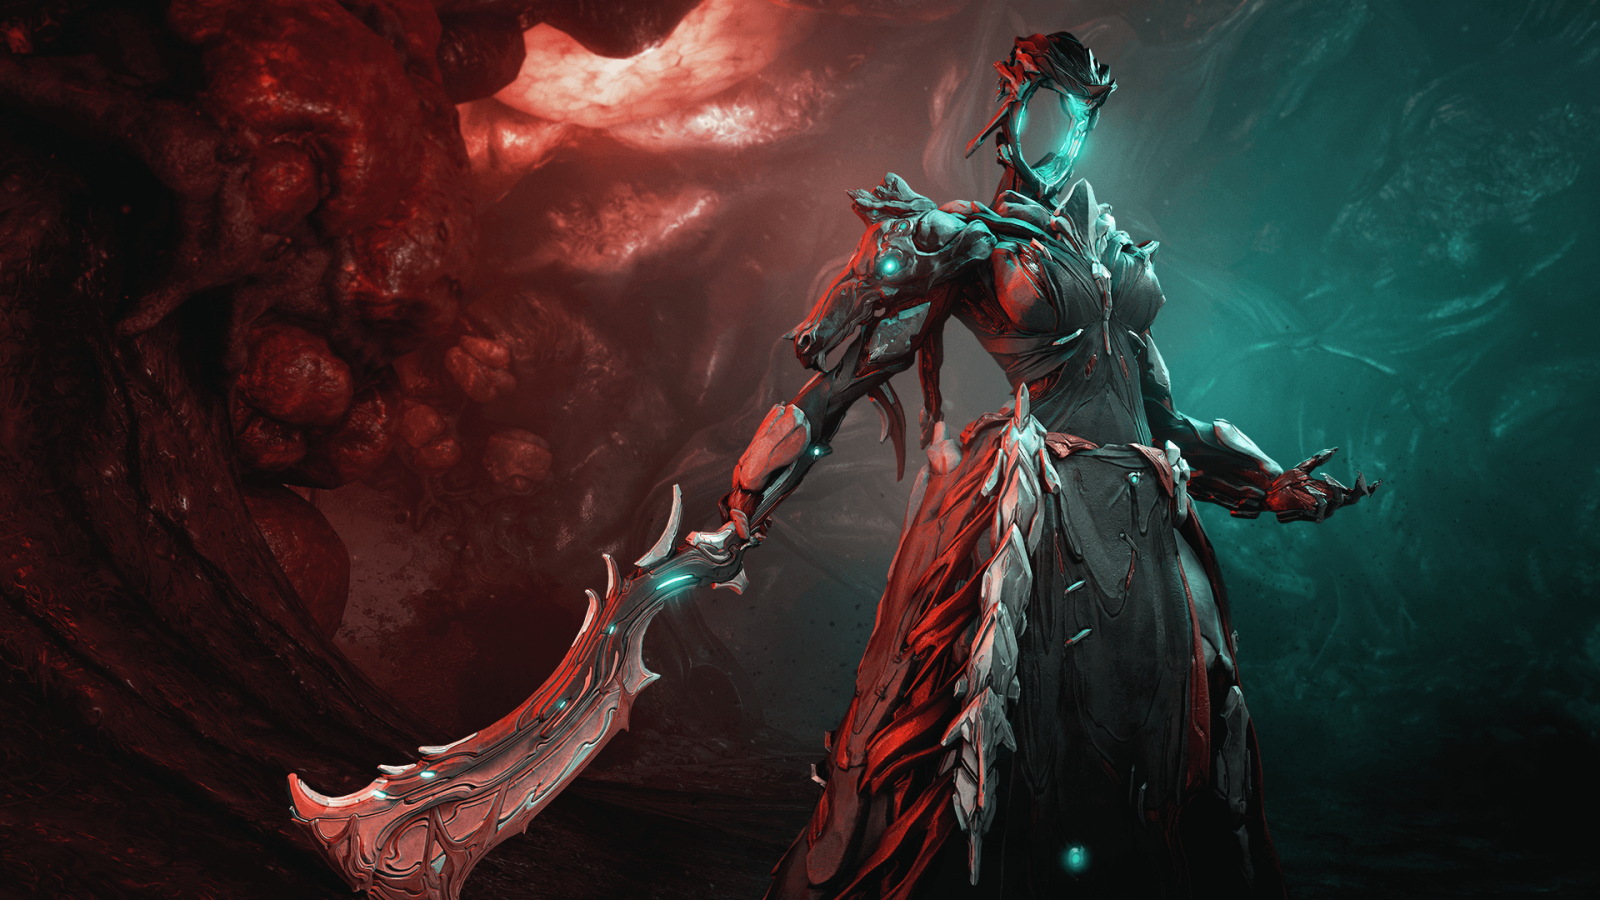 Digital Extremes Provides Exciting News about Warframe's Abyss of Dagath